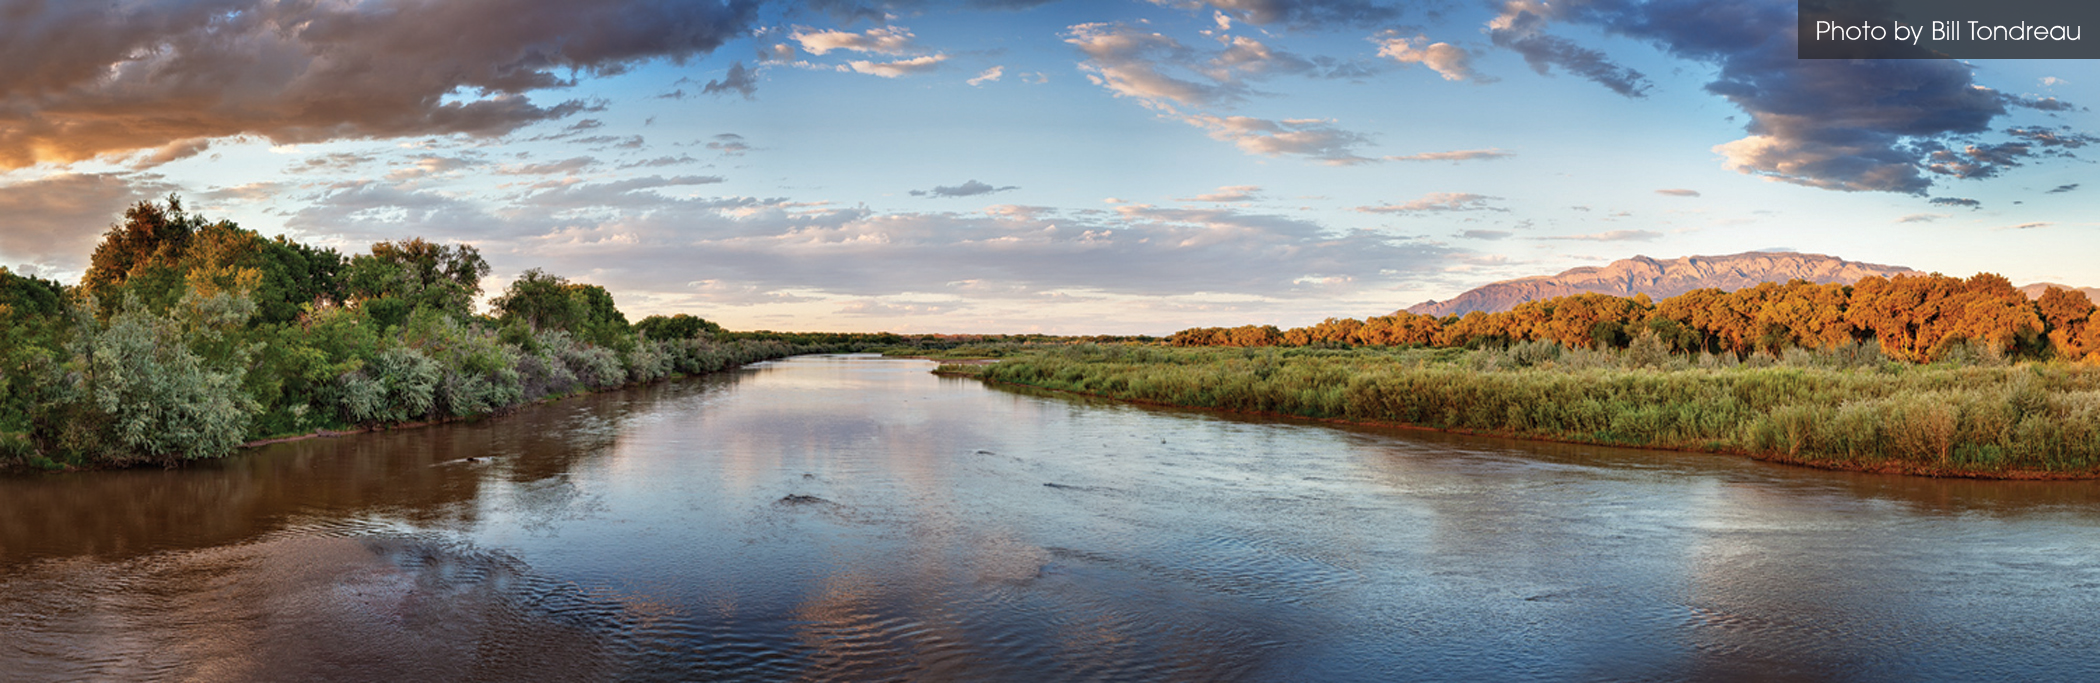 Afternoon on the Rio Grande by Bill Tondreau